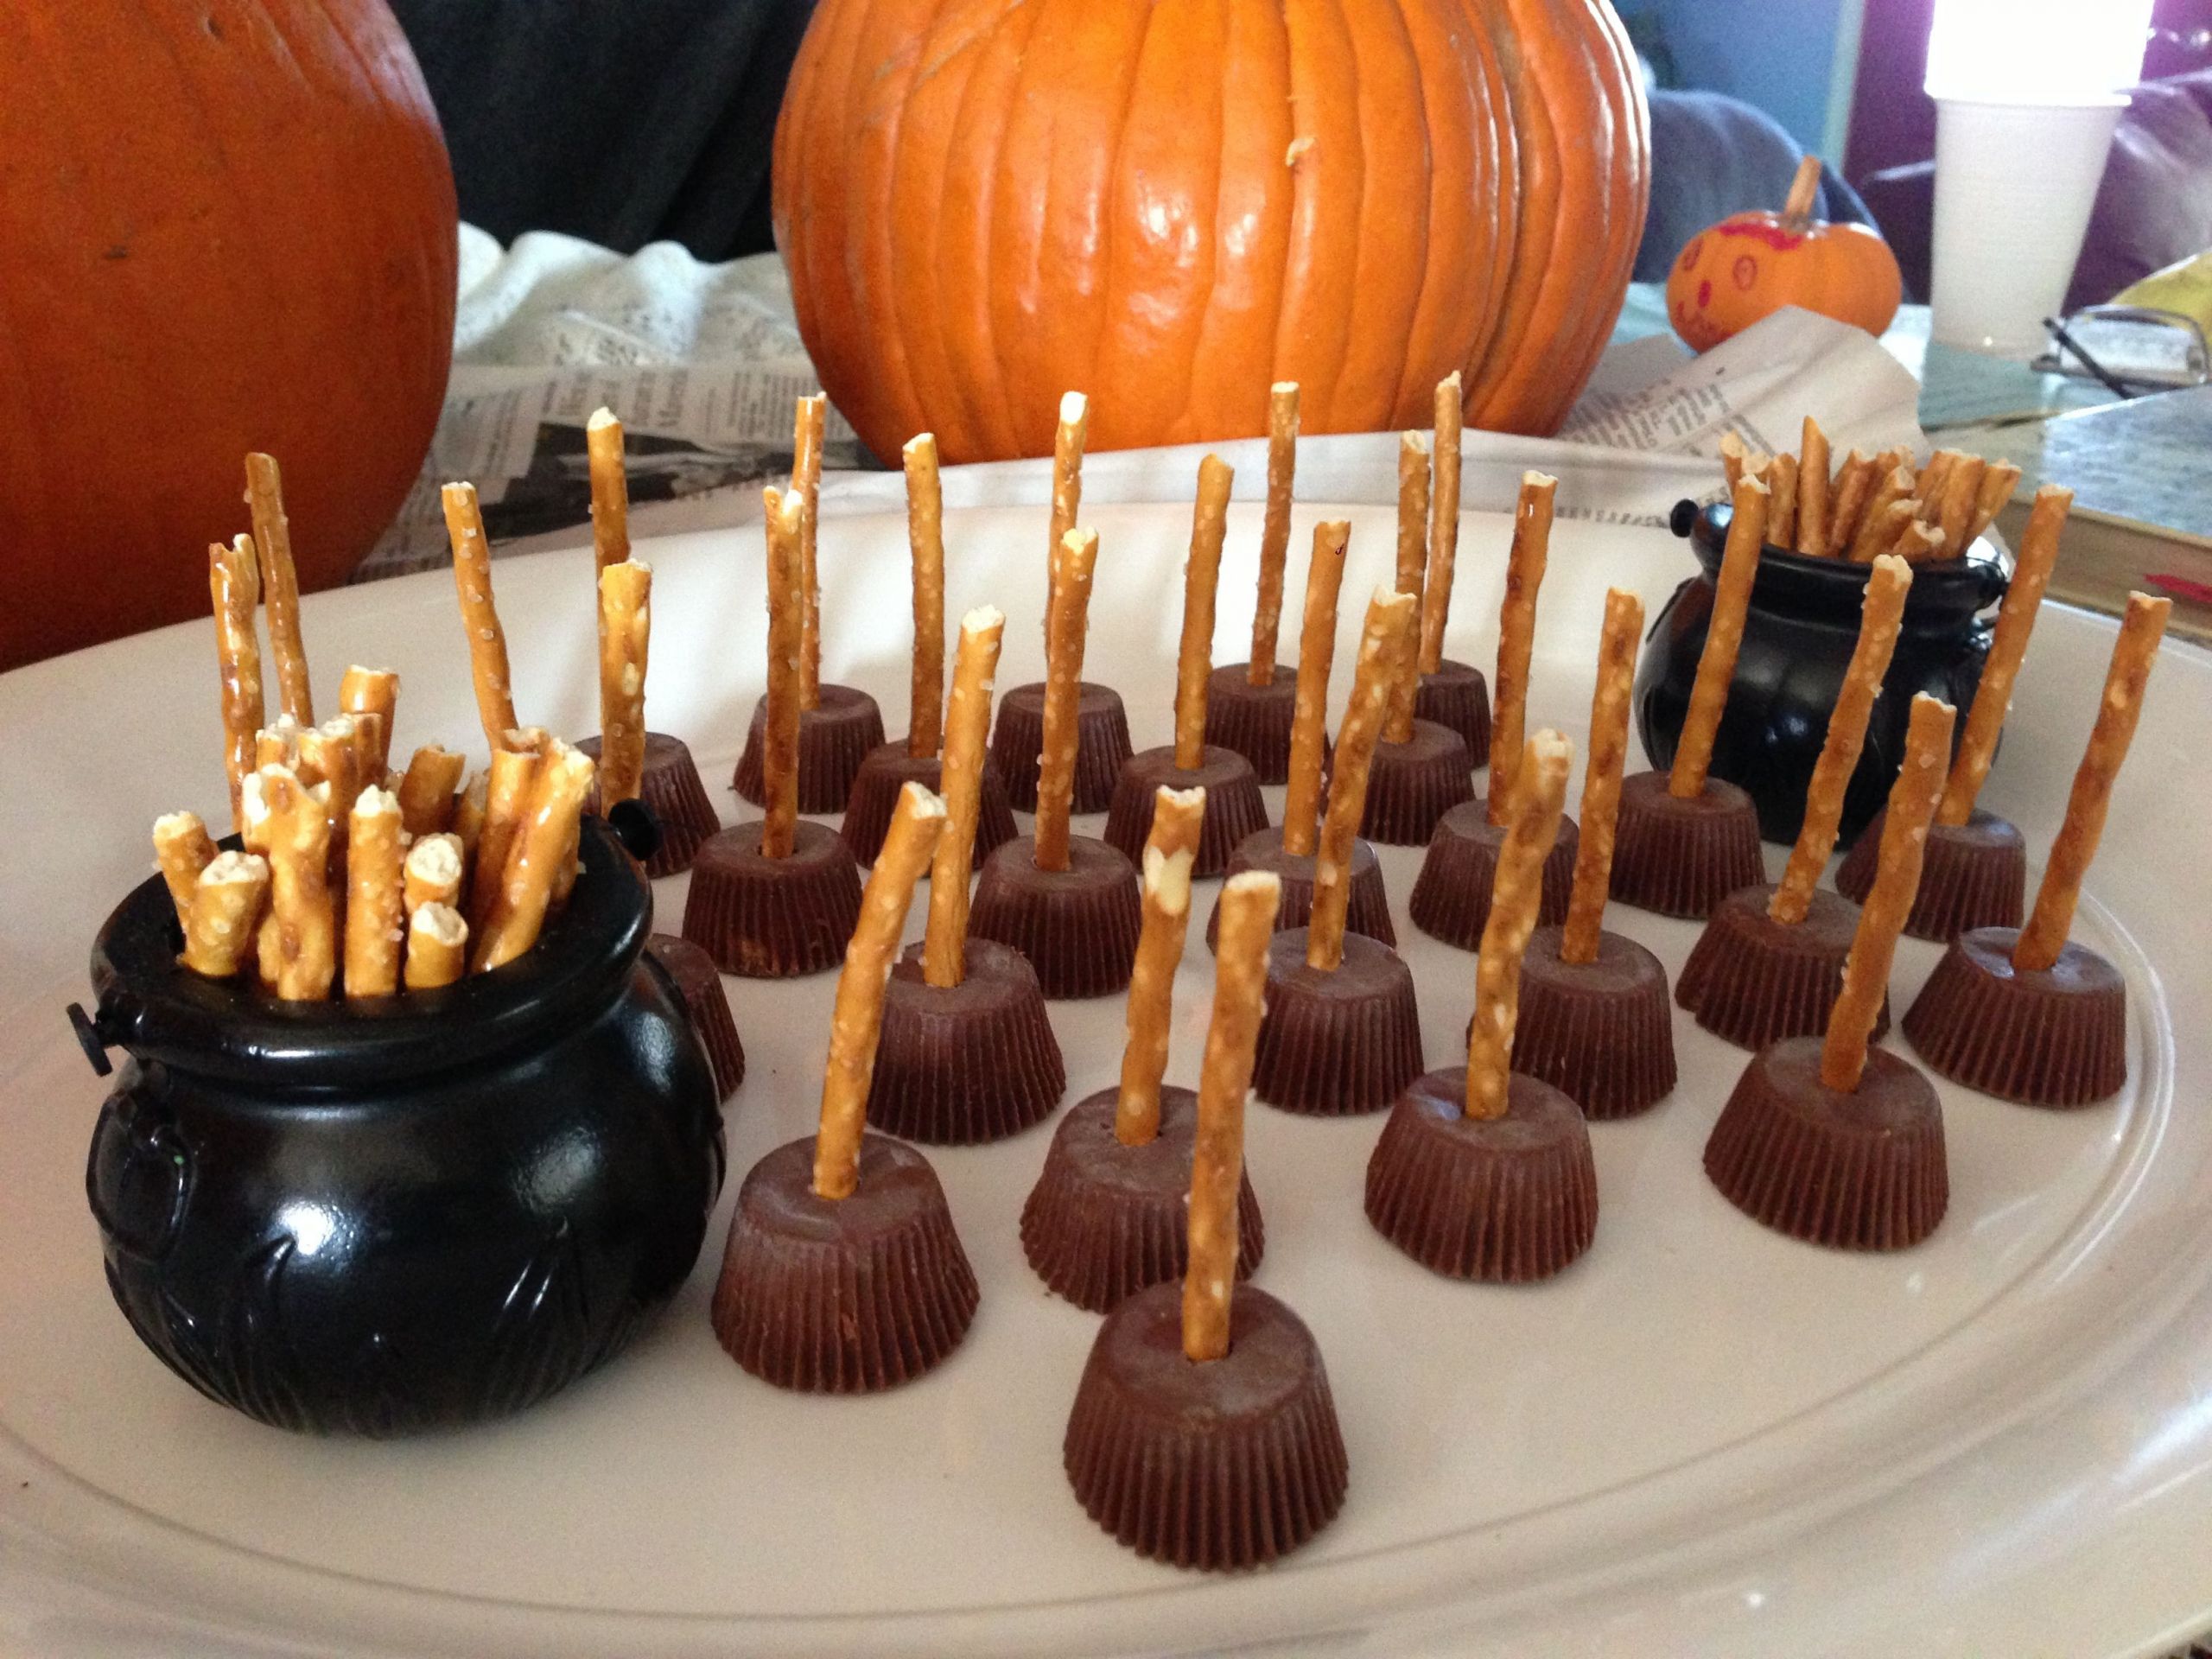 3Rd Grade Halloween Party Ideas
 Witches broomsticks for 3rd grade classroom party today